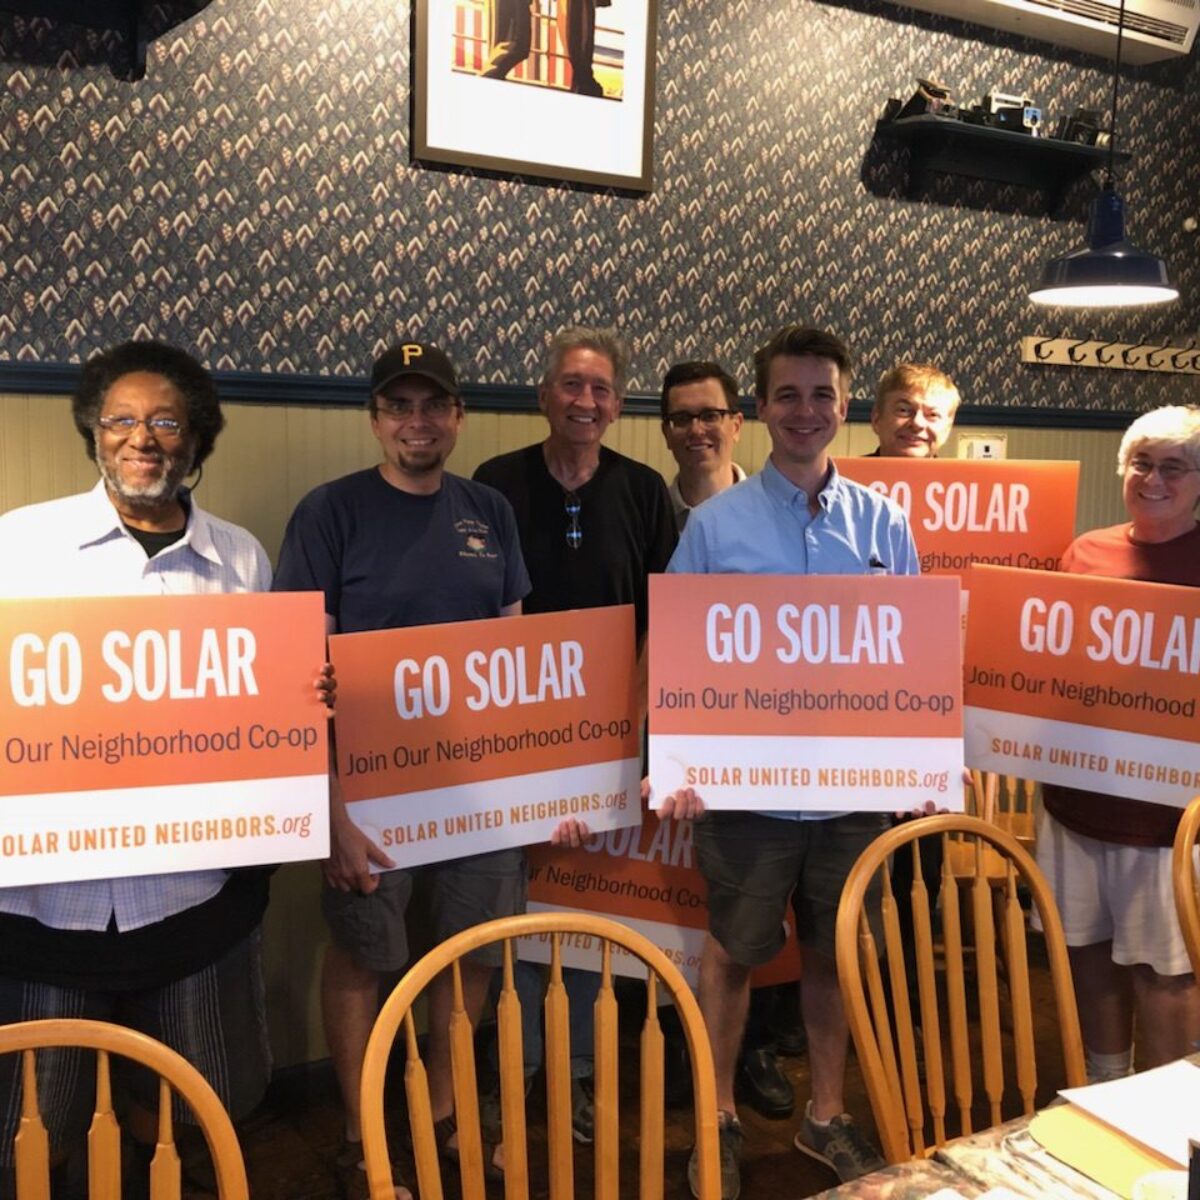 Group holding "Go solar" signs.